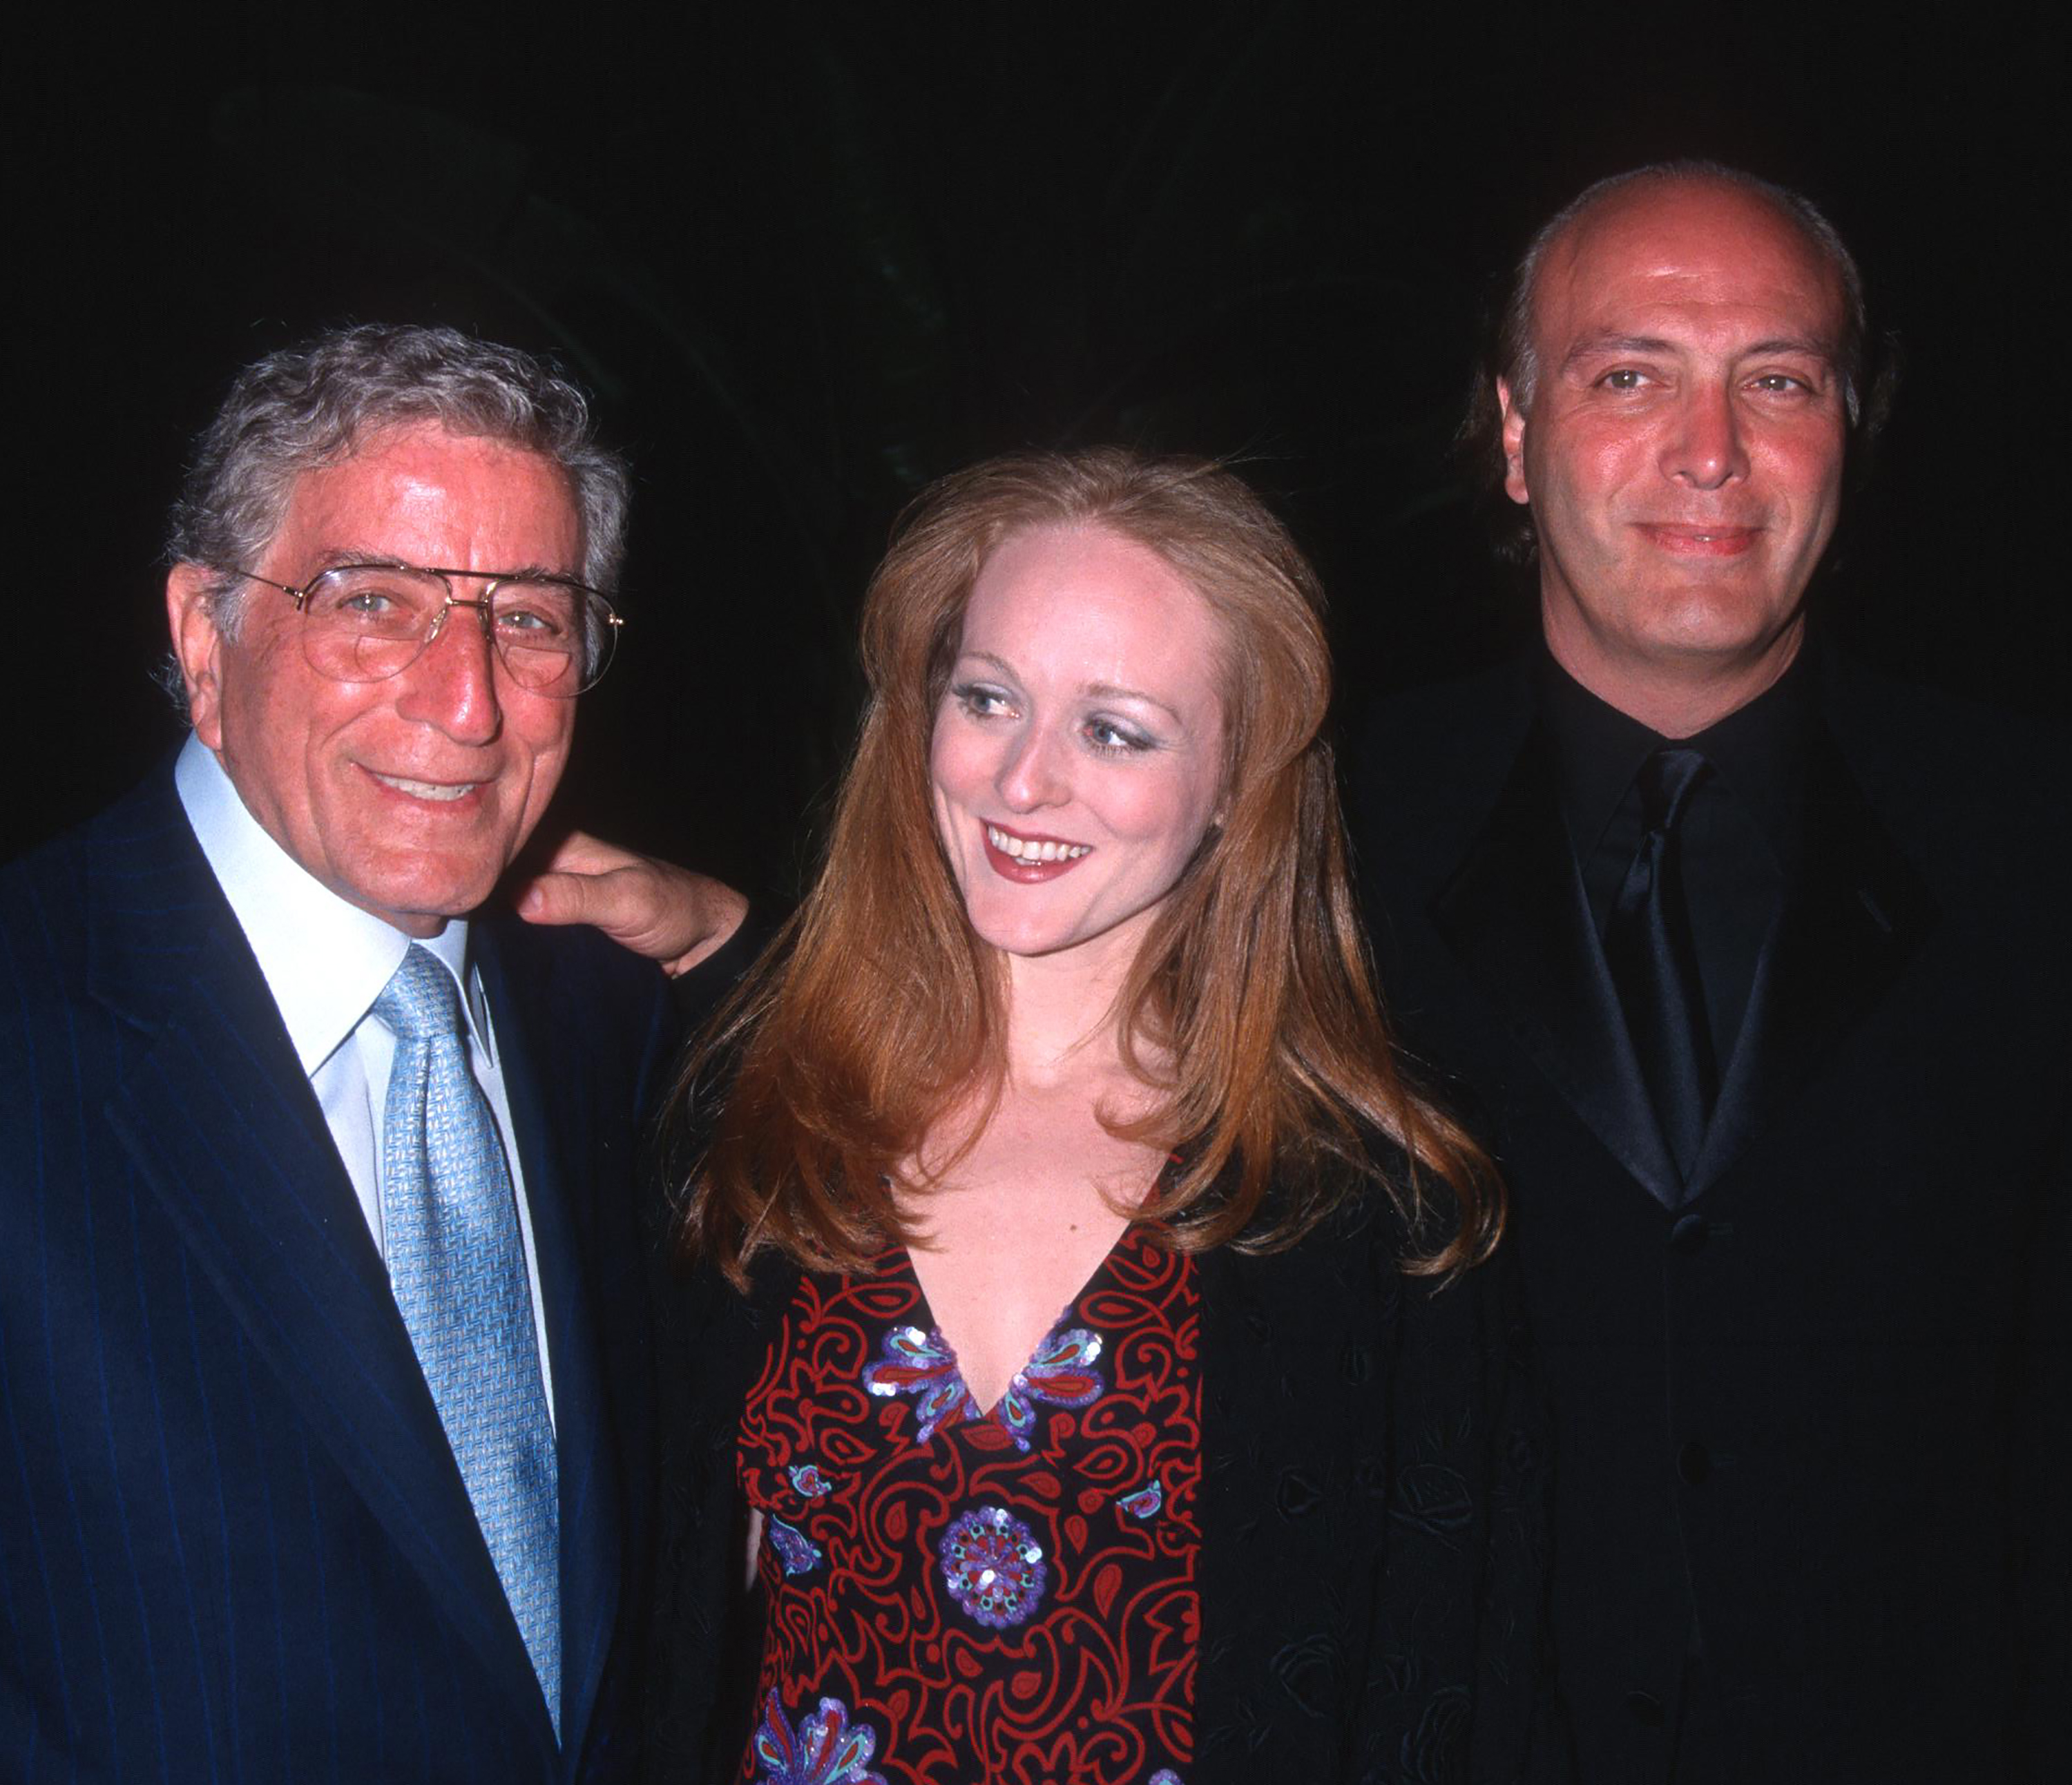 Tony, Antonia, and Danny Bennett at the Clive Davis pre-Grammy party in Beverly Hills, 2002 | Source: Getty Images